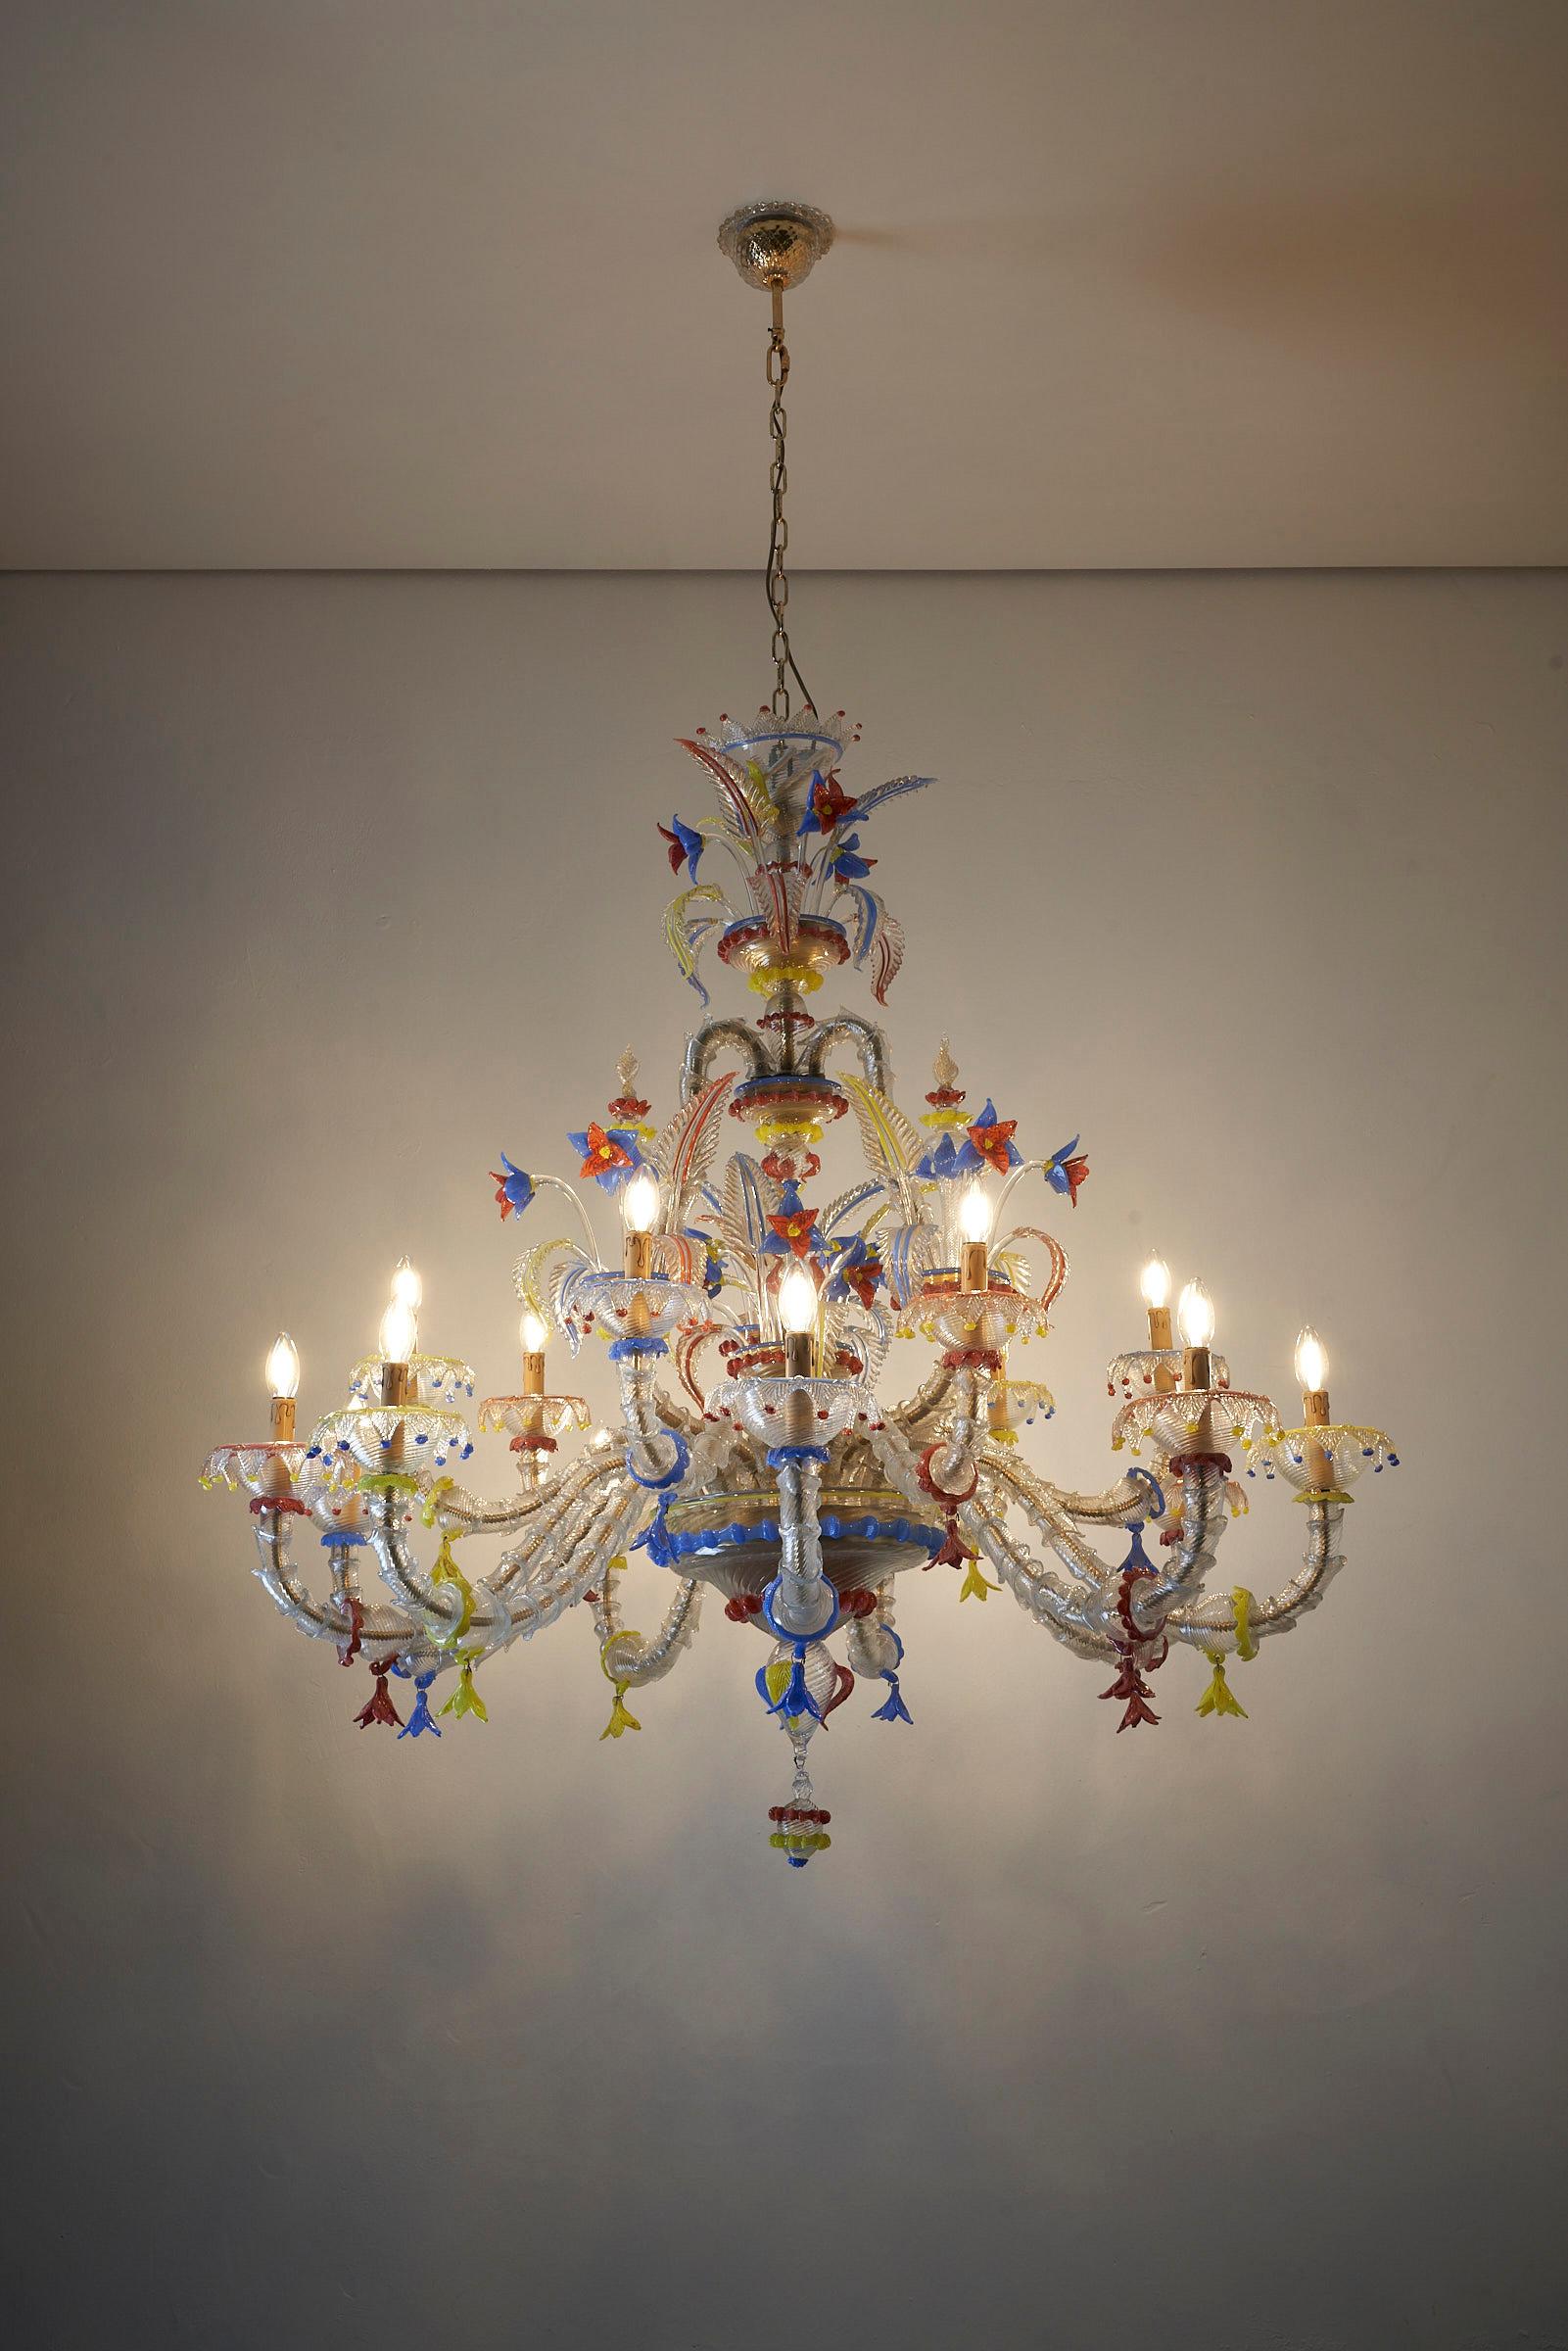 Introducing the stunning XL Murano Chandelier Multicoloured, a true masterpiece of Venetian craftsmanship. With its grandeur and elegance, this chandelier commands attention and adds a touch of opulence to any space.

Featuring 15 exquisite arms,